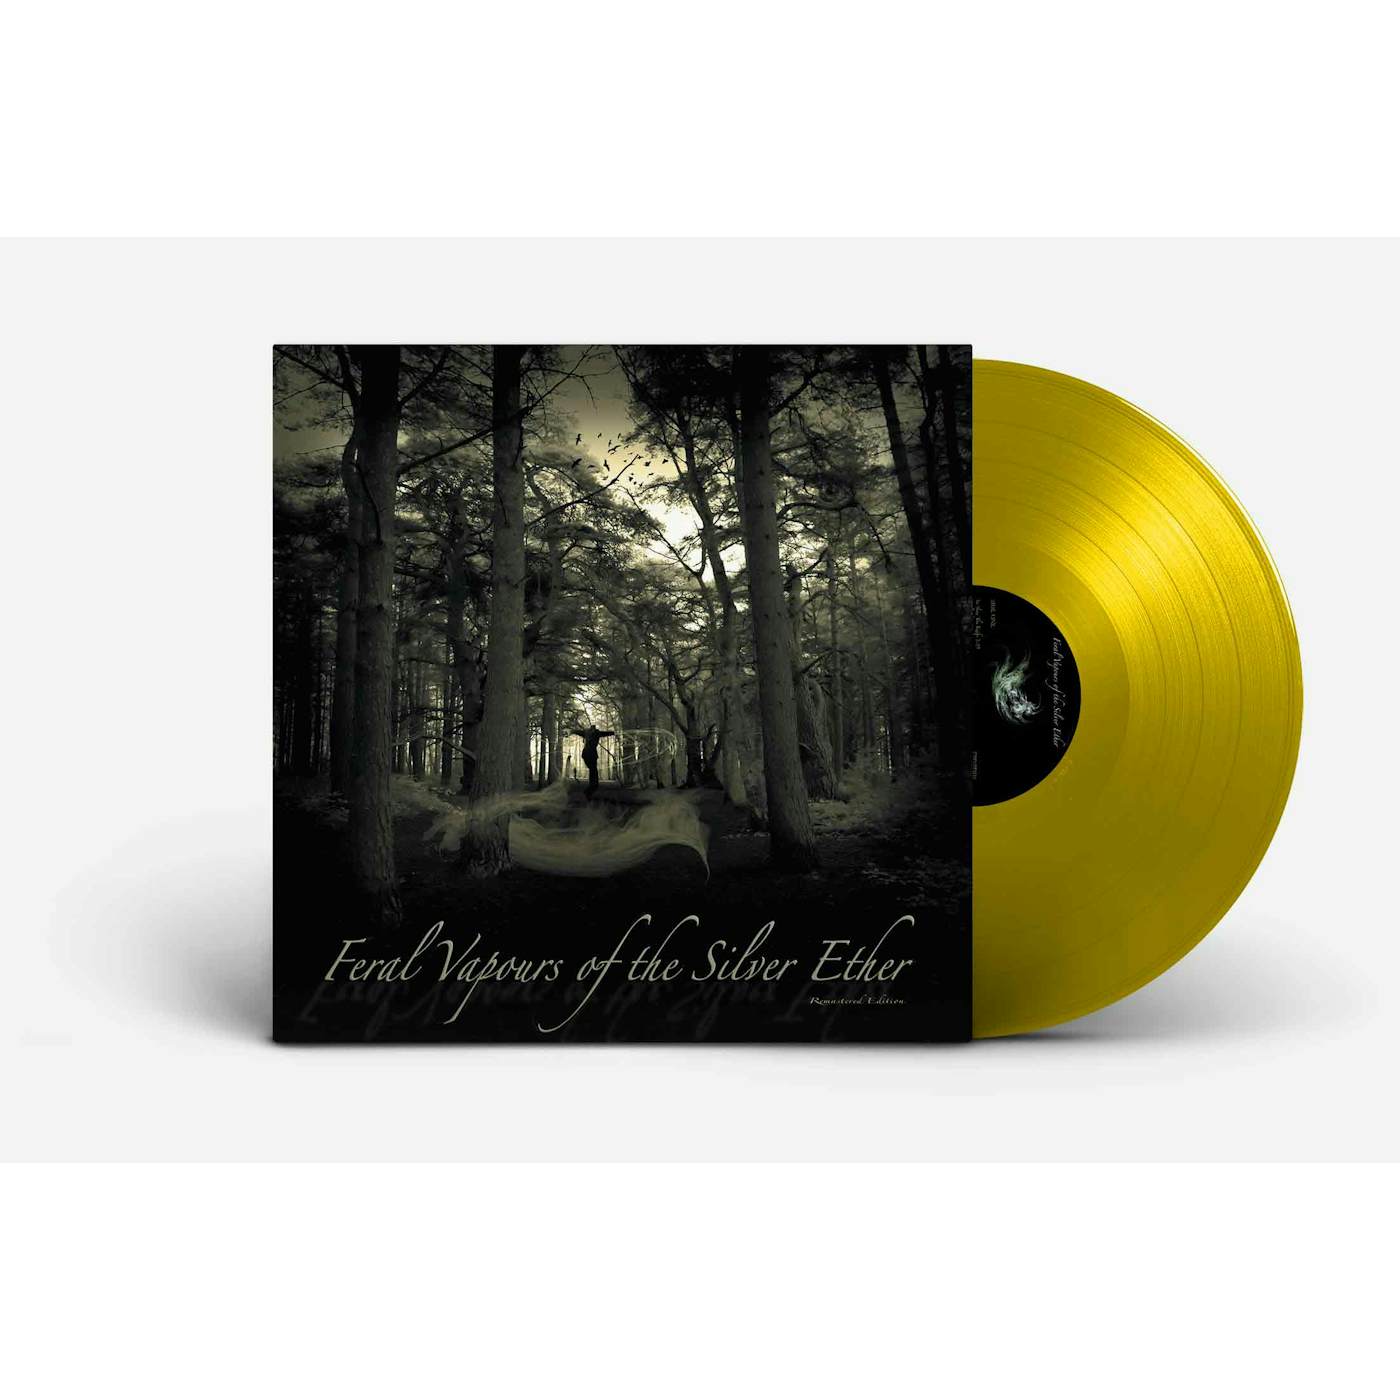 Chris & Cosey 'Feral Vapours Of The Silver Ether' Vinyl LP - Yellow Vinyl Record